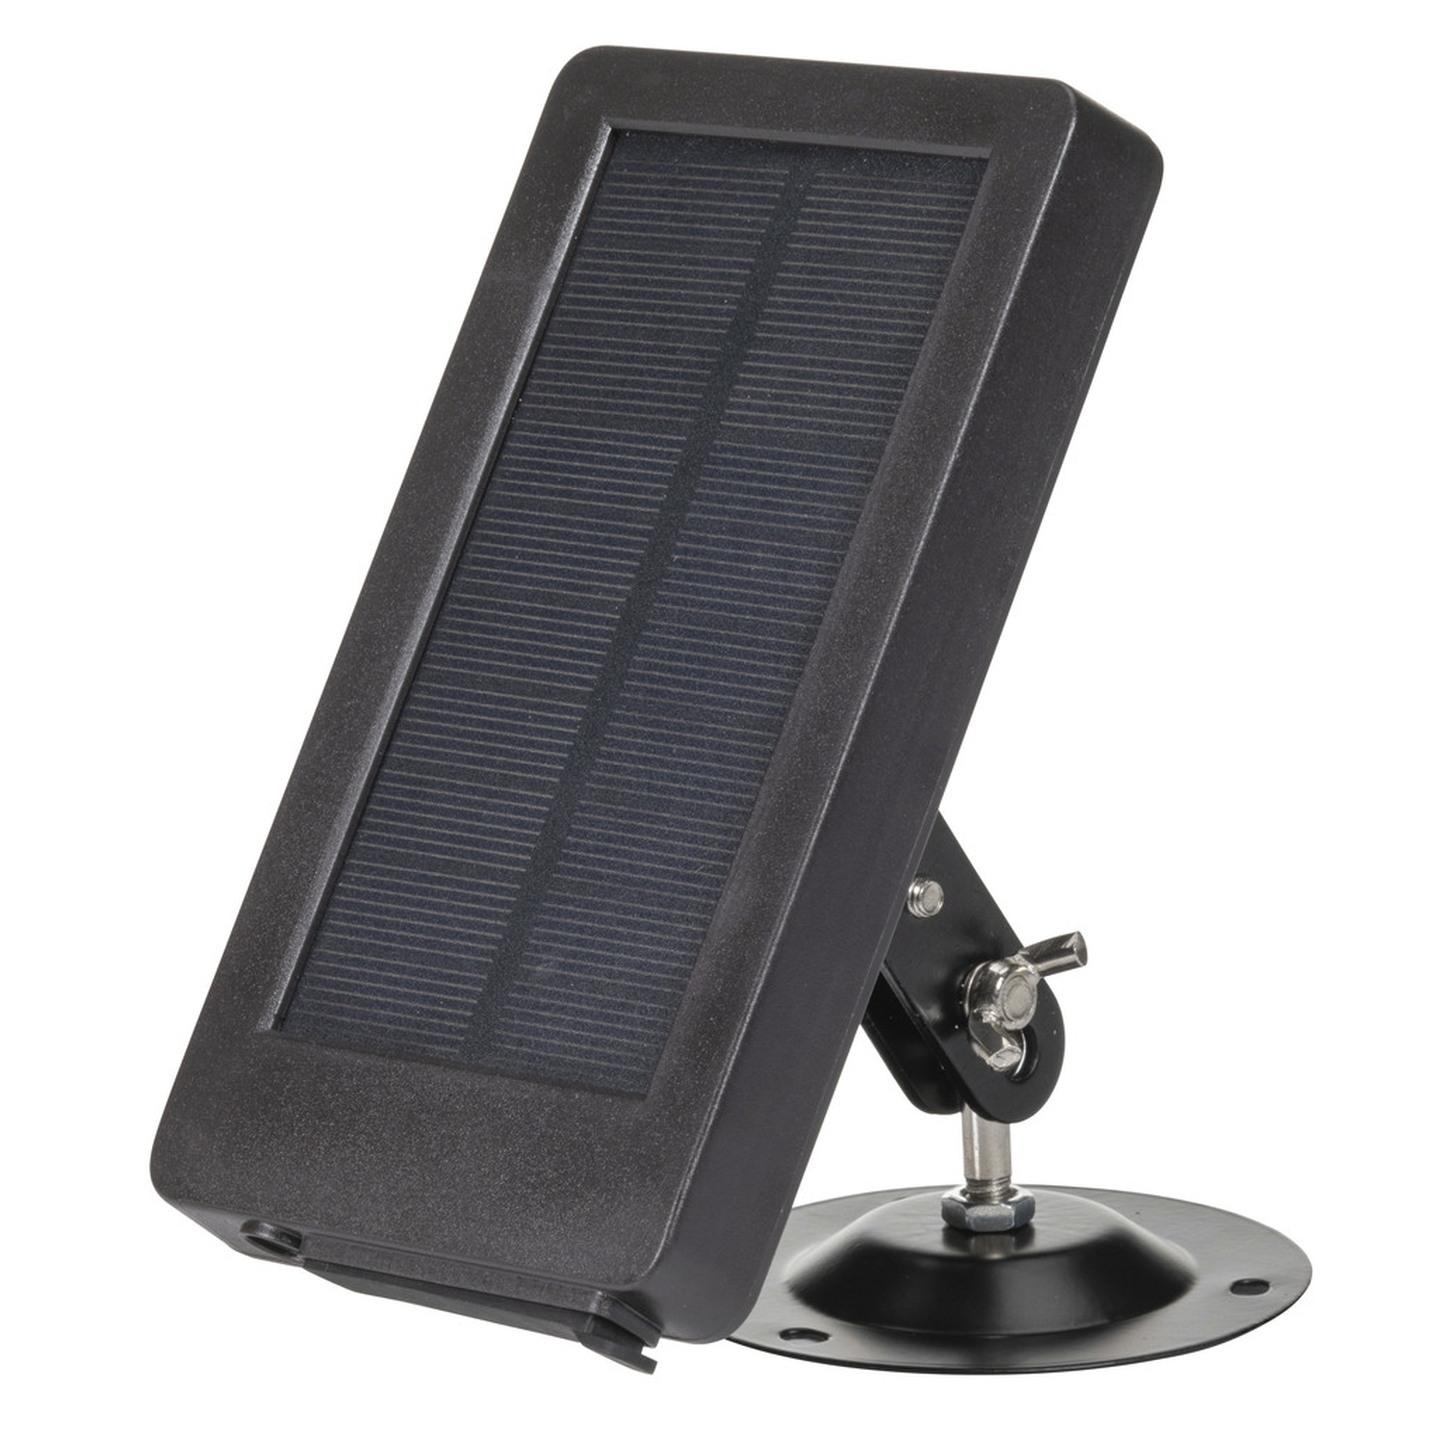 6V Solar Panel to Suit Outdoor Trail Cameras QC8061/63